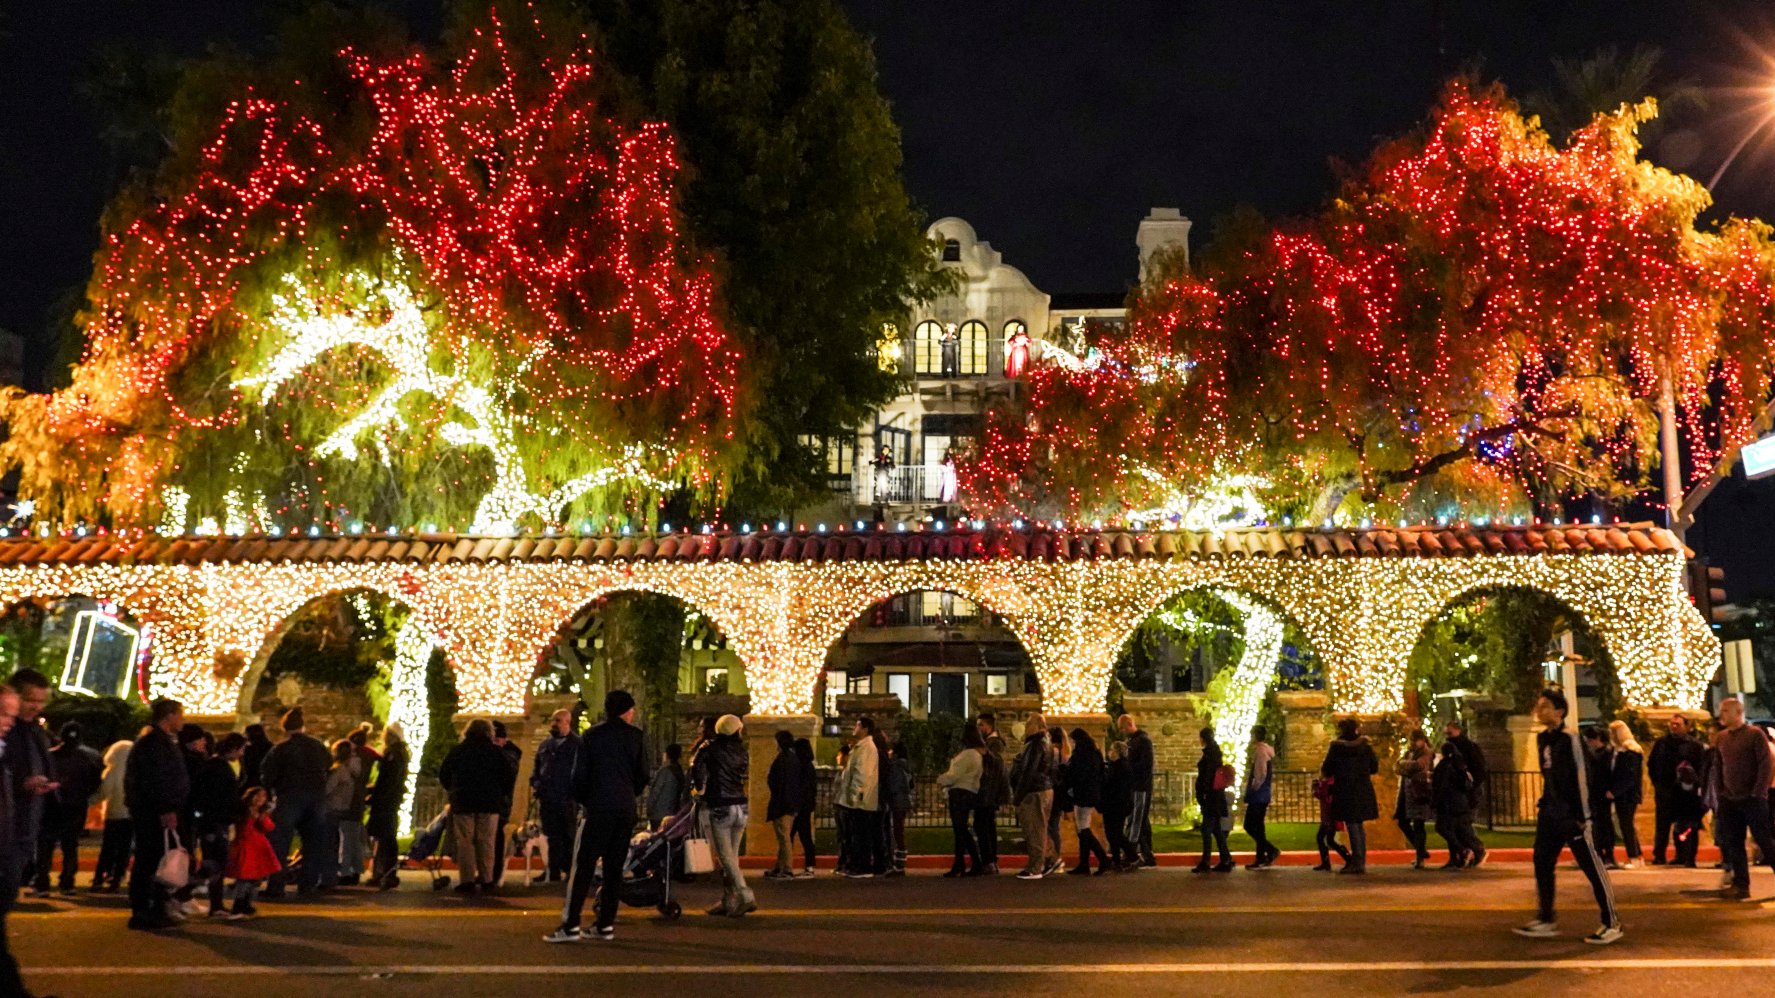 Riverside’s Renowned Festival of Lights to Go Ahead But Scaled Down Due